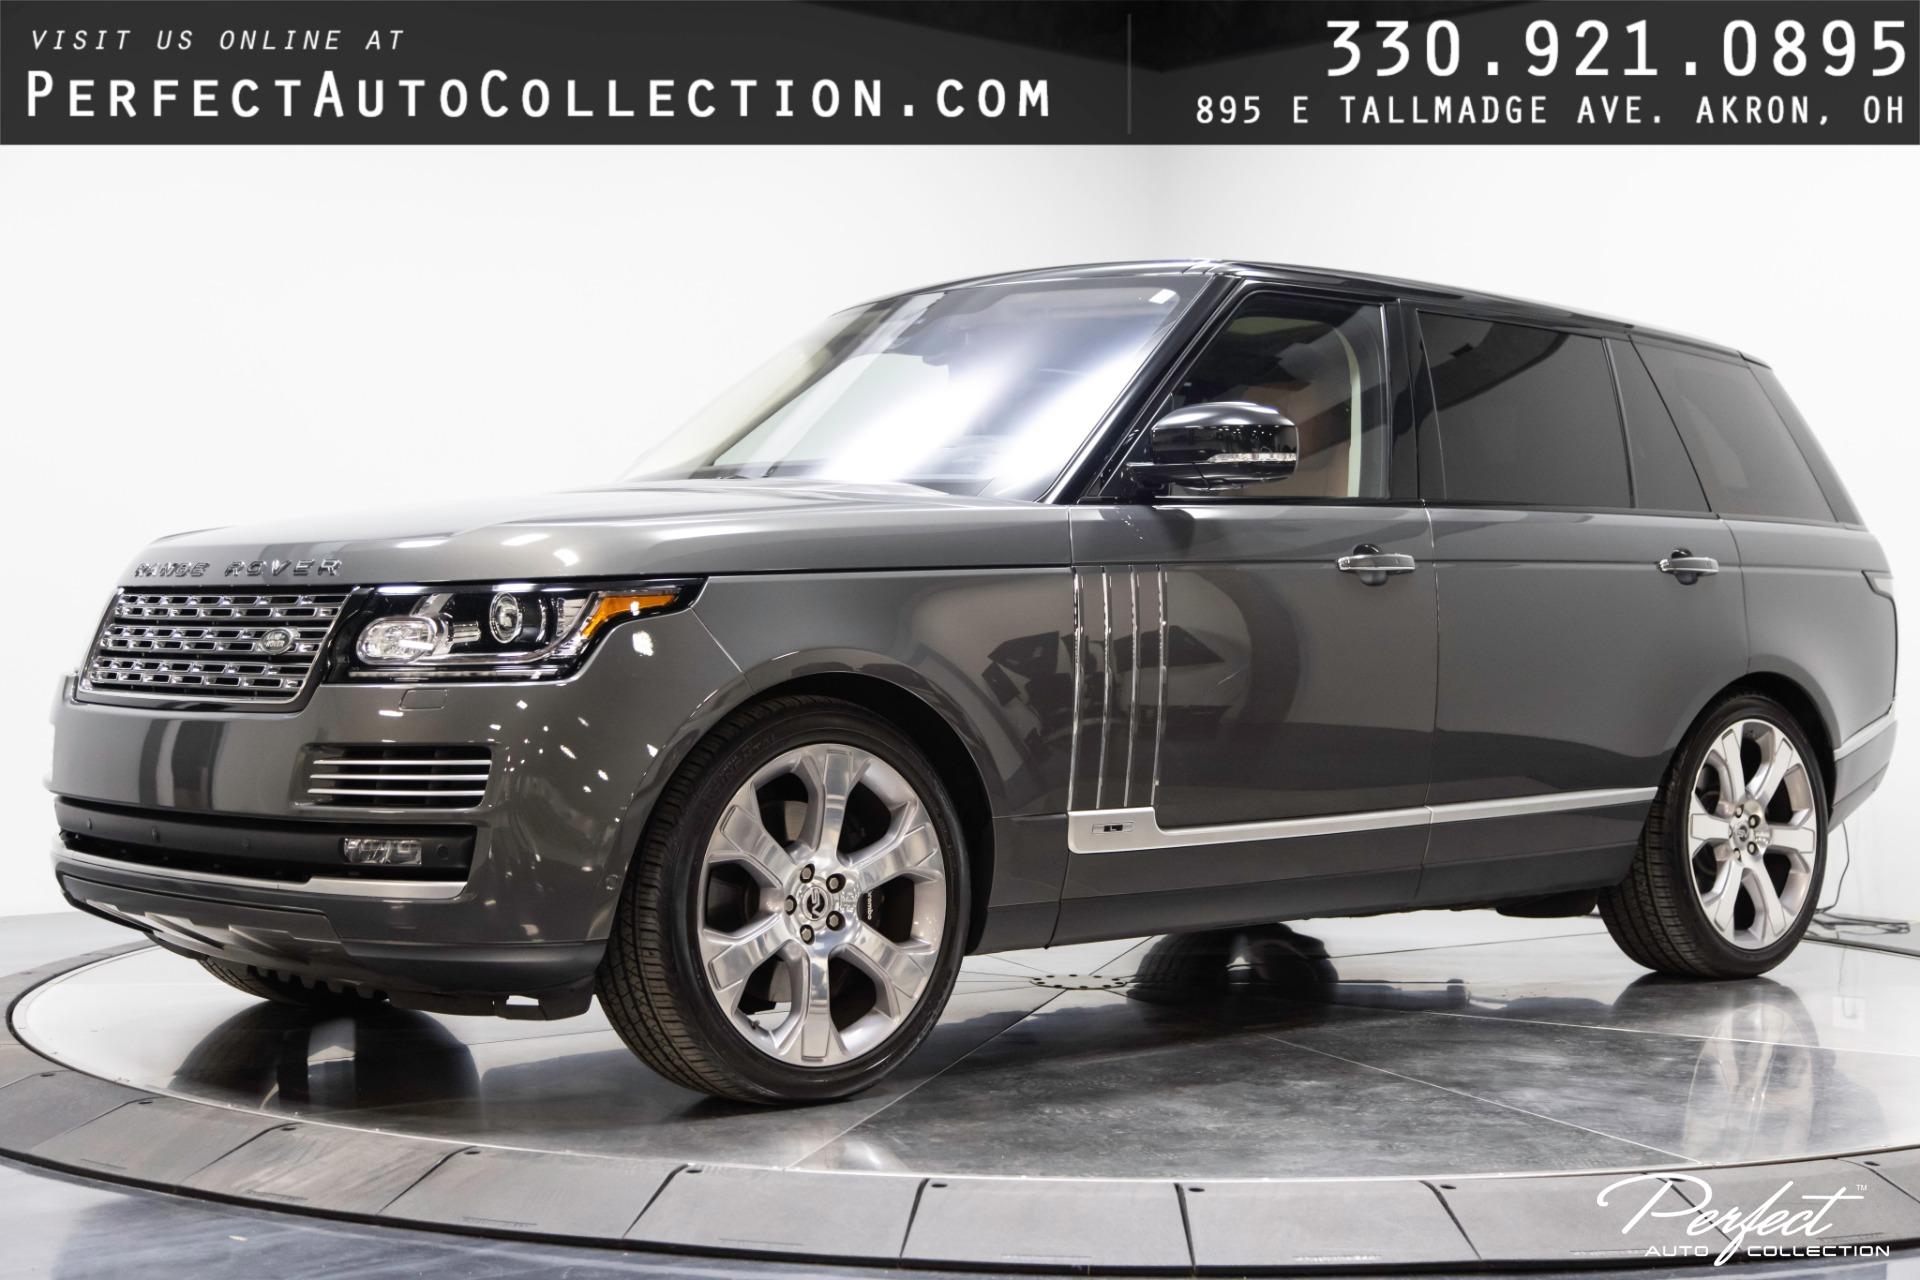 Used 2016 Land Rover Range Rover SVAutobiography LWB For Sale (Sold)  Perfect Auto Collection Stock #285358